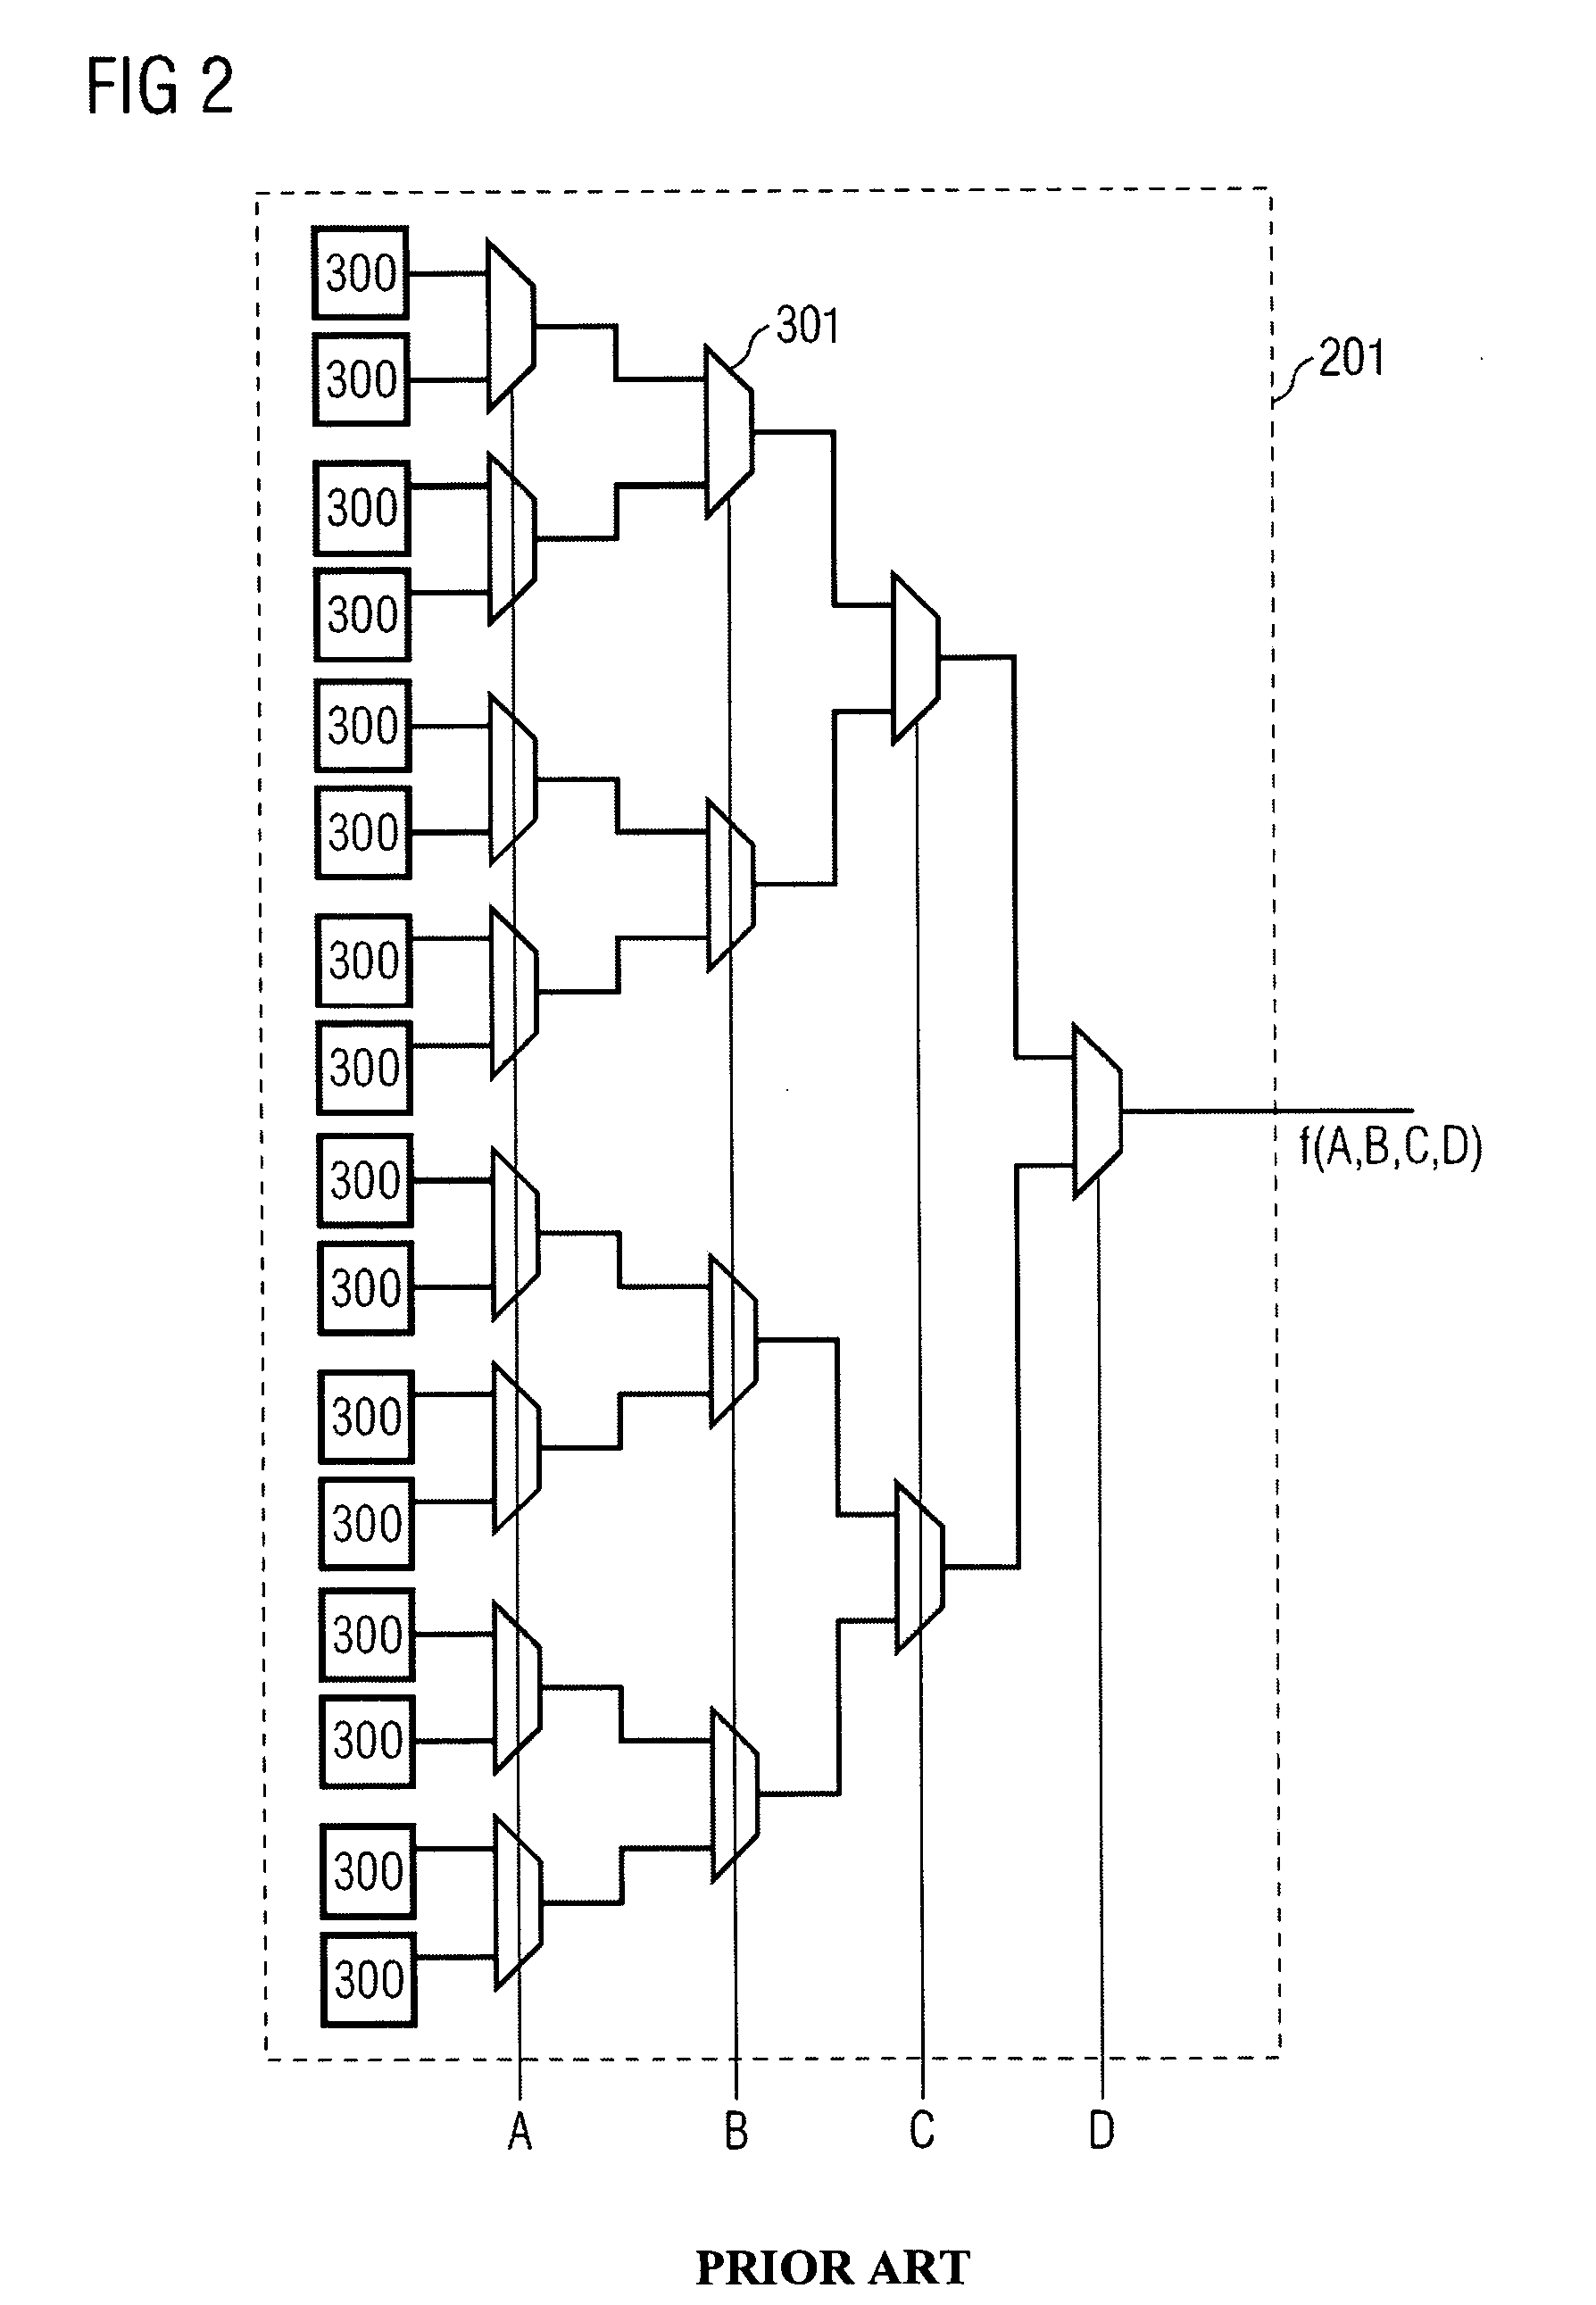 Programmable logic cell